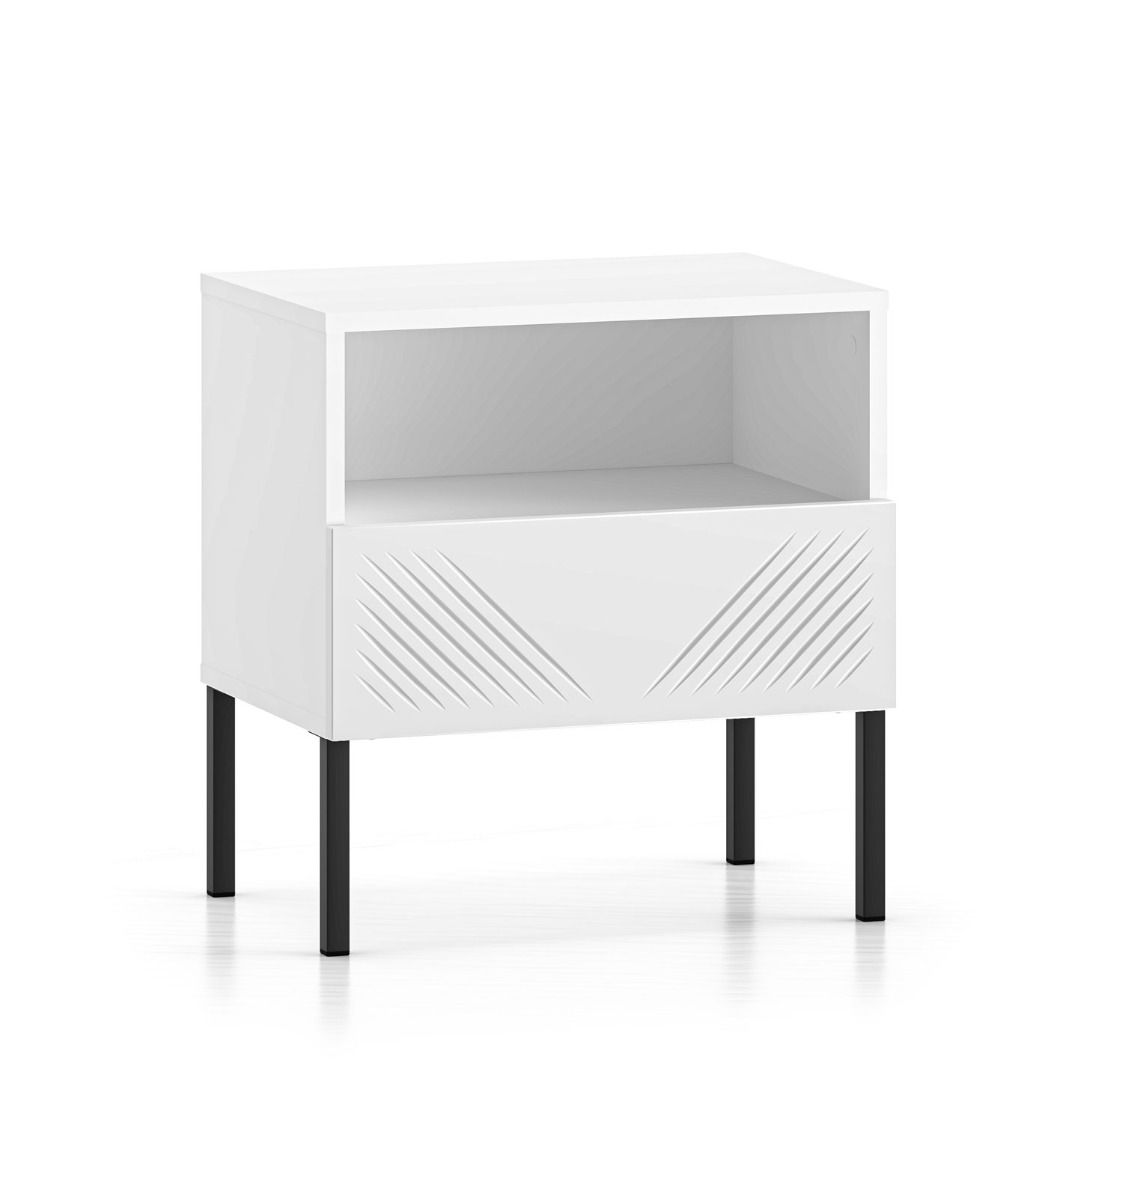 Timeless bedside cabinet Taos 17, color: white matt, stable and robust, dimensions: 53 x 50 x 34 cm, legs: black, with 1 drawer and 1 compartment